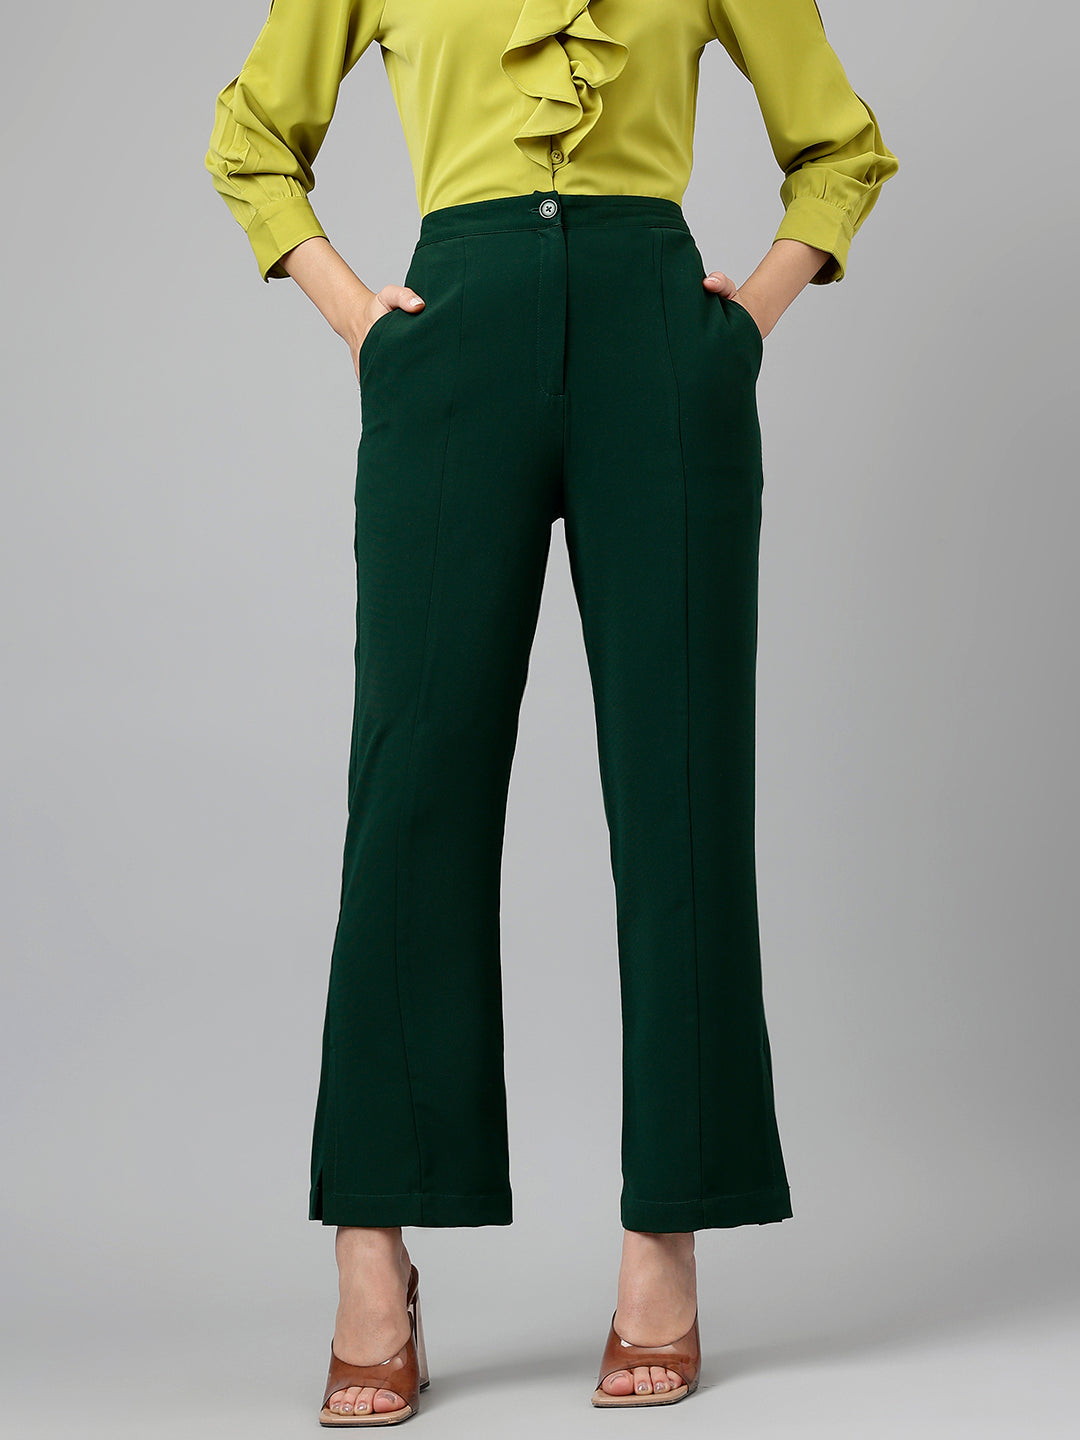 Ankle Length Solid Dark Green Pants